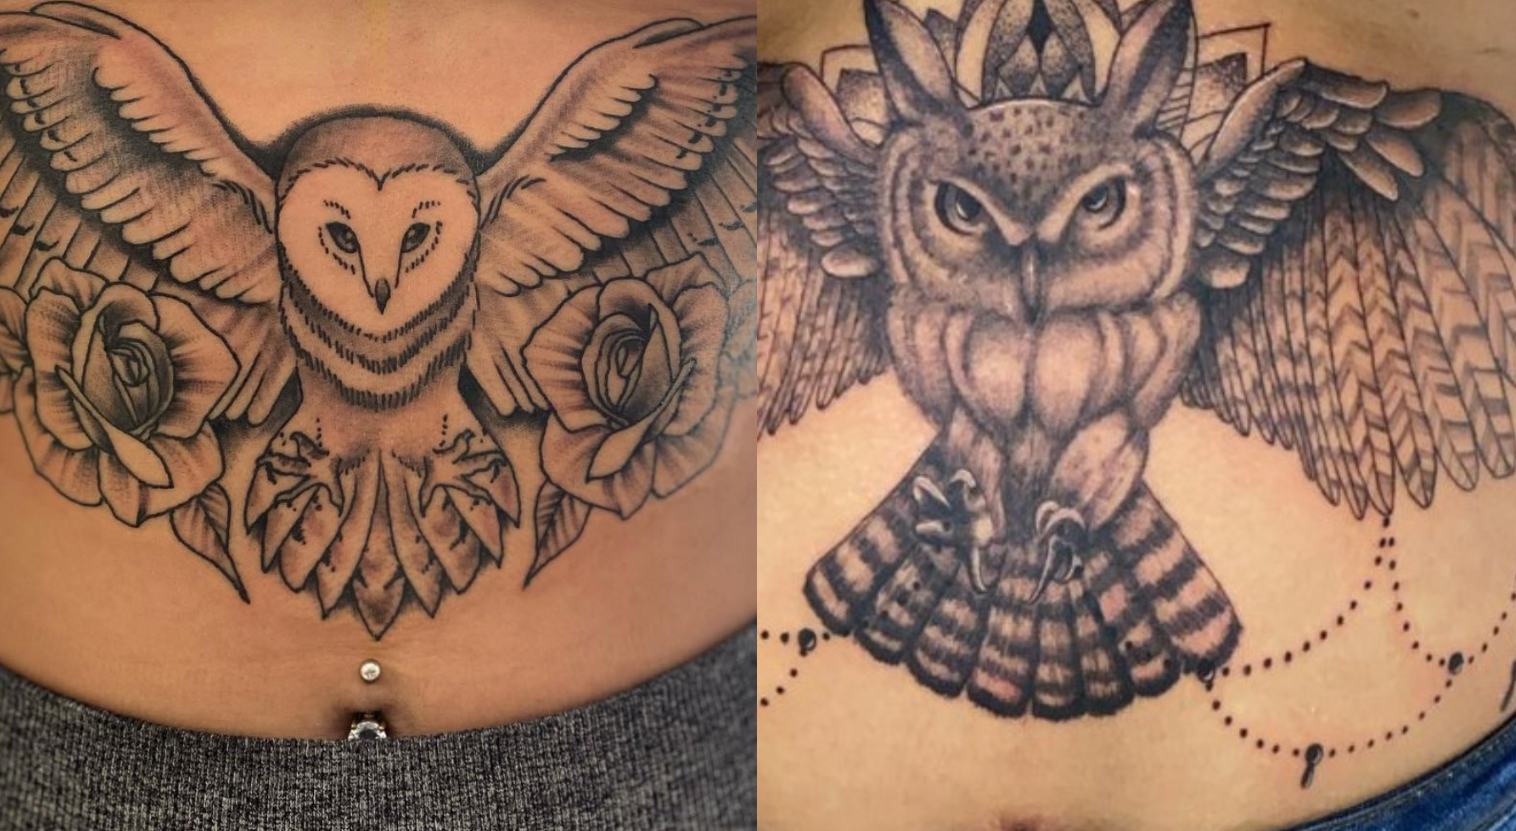 A lady with an owl tattoo in grey skirt (L) and another with an owl tattoo in jeans trousers (R)